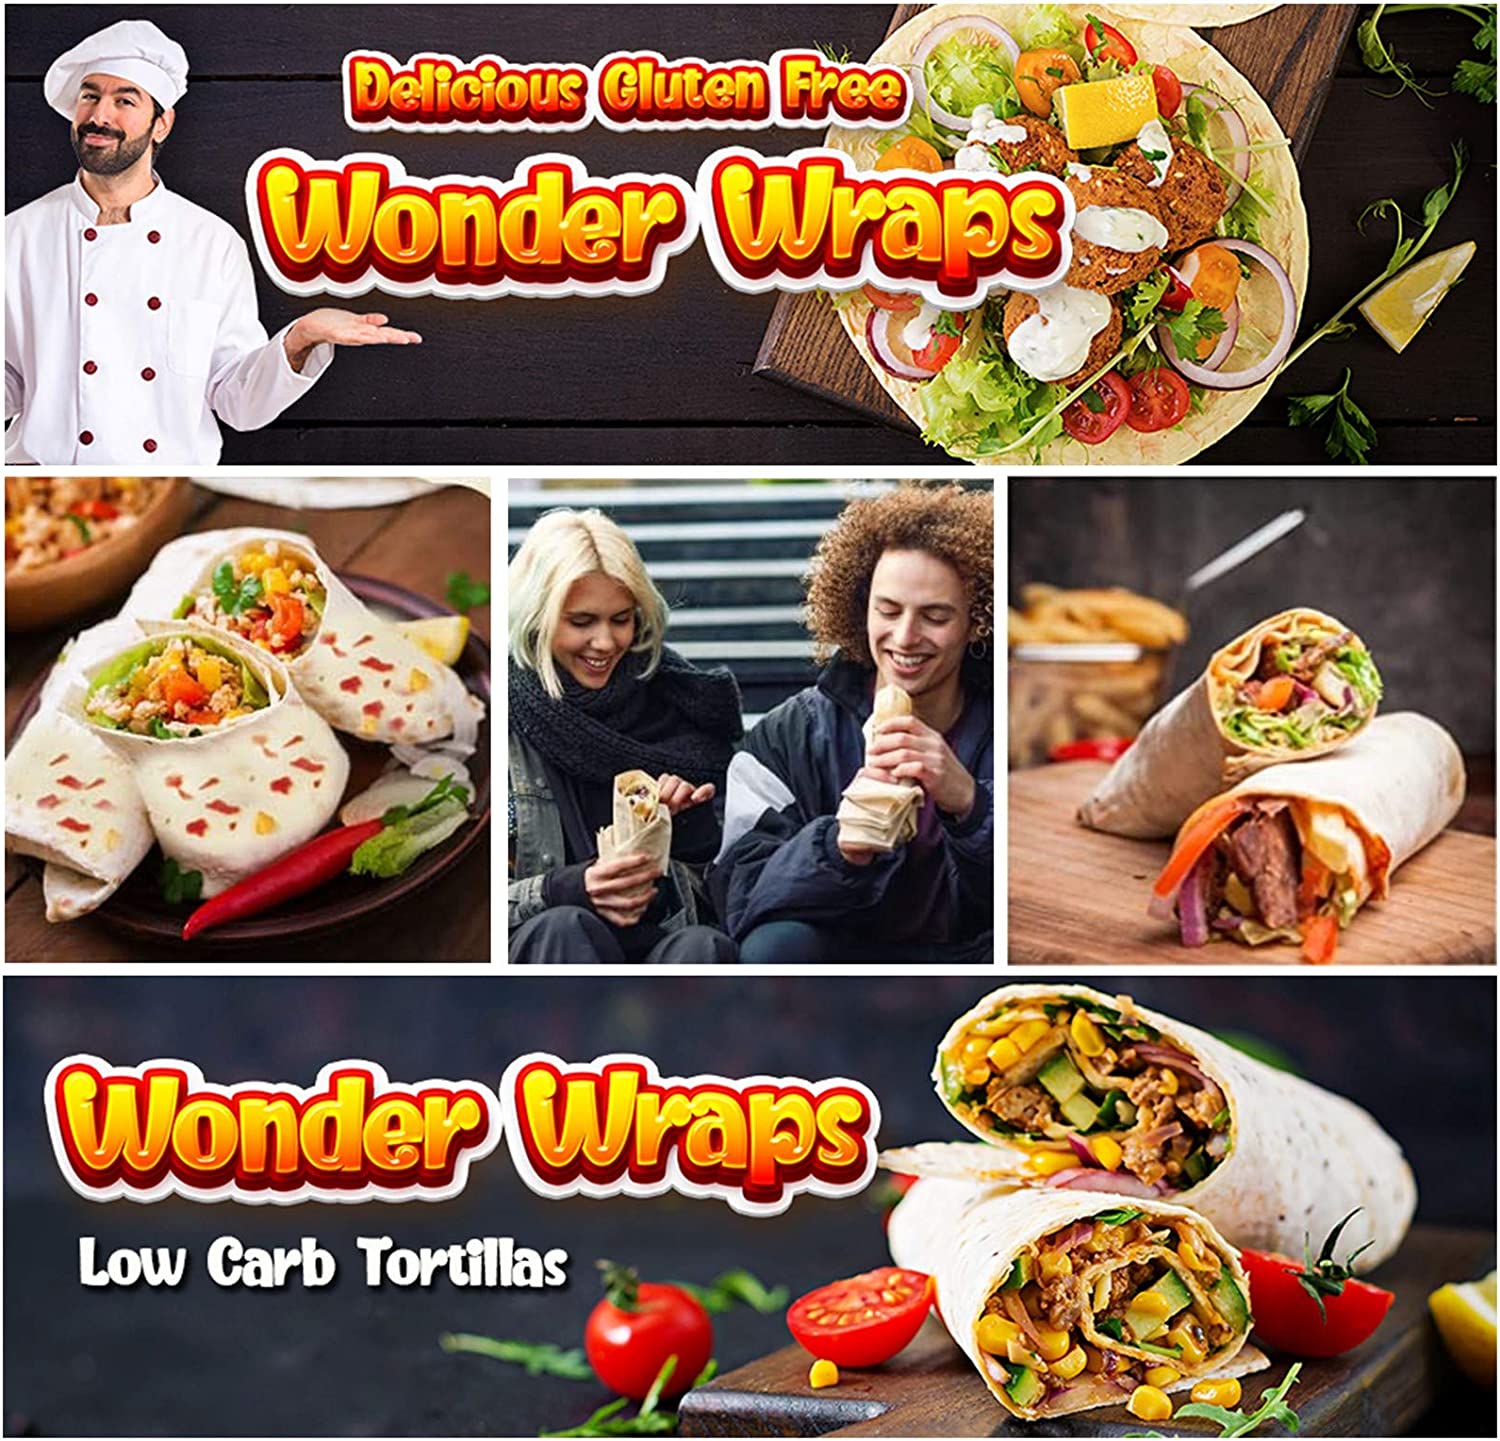 Wonder Wraps - Hot Chili - Delicious Gluten Free, Low Carb Keto - UK Review